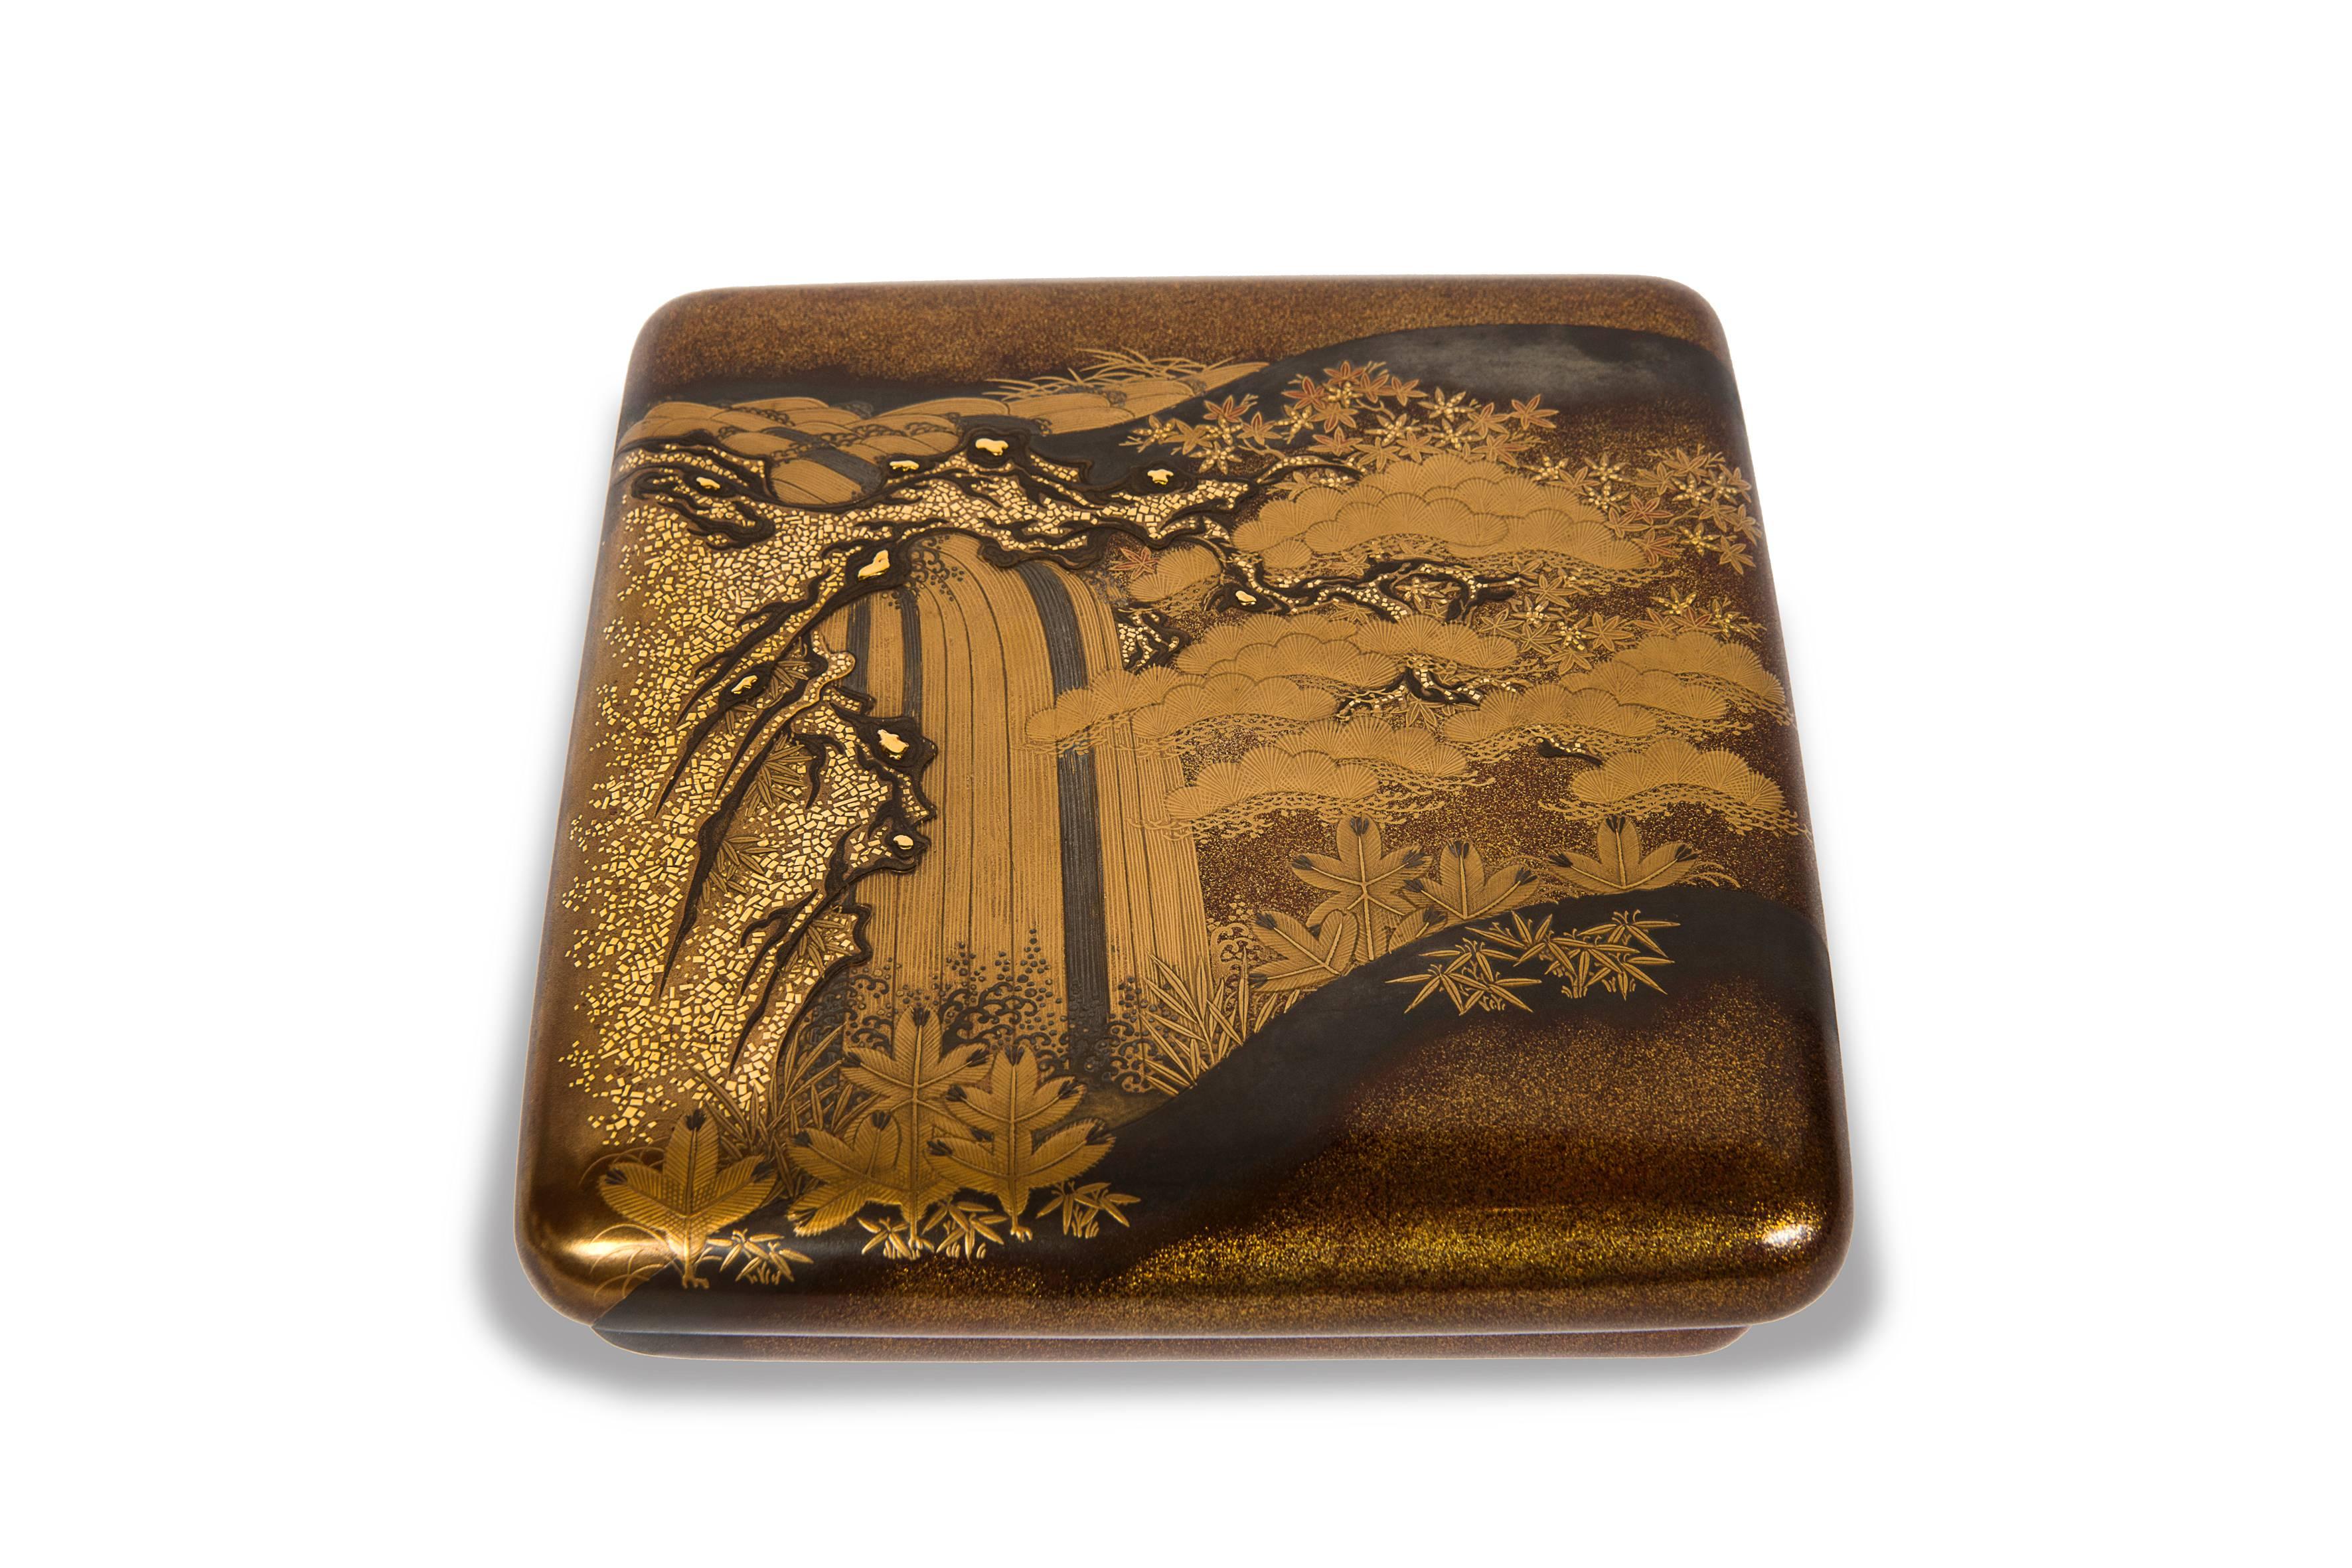 Exceptional suzuribako in hira maki-e, taka maki-e and hedatsu gold, silver and red lacquer of a bubbling waterfall amidst a pine forest.
The interior of the lid features five cranes, three in flight and two on the ground, in a landscape of pine